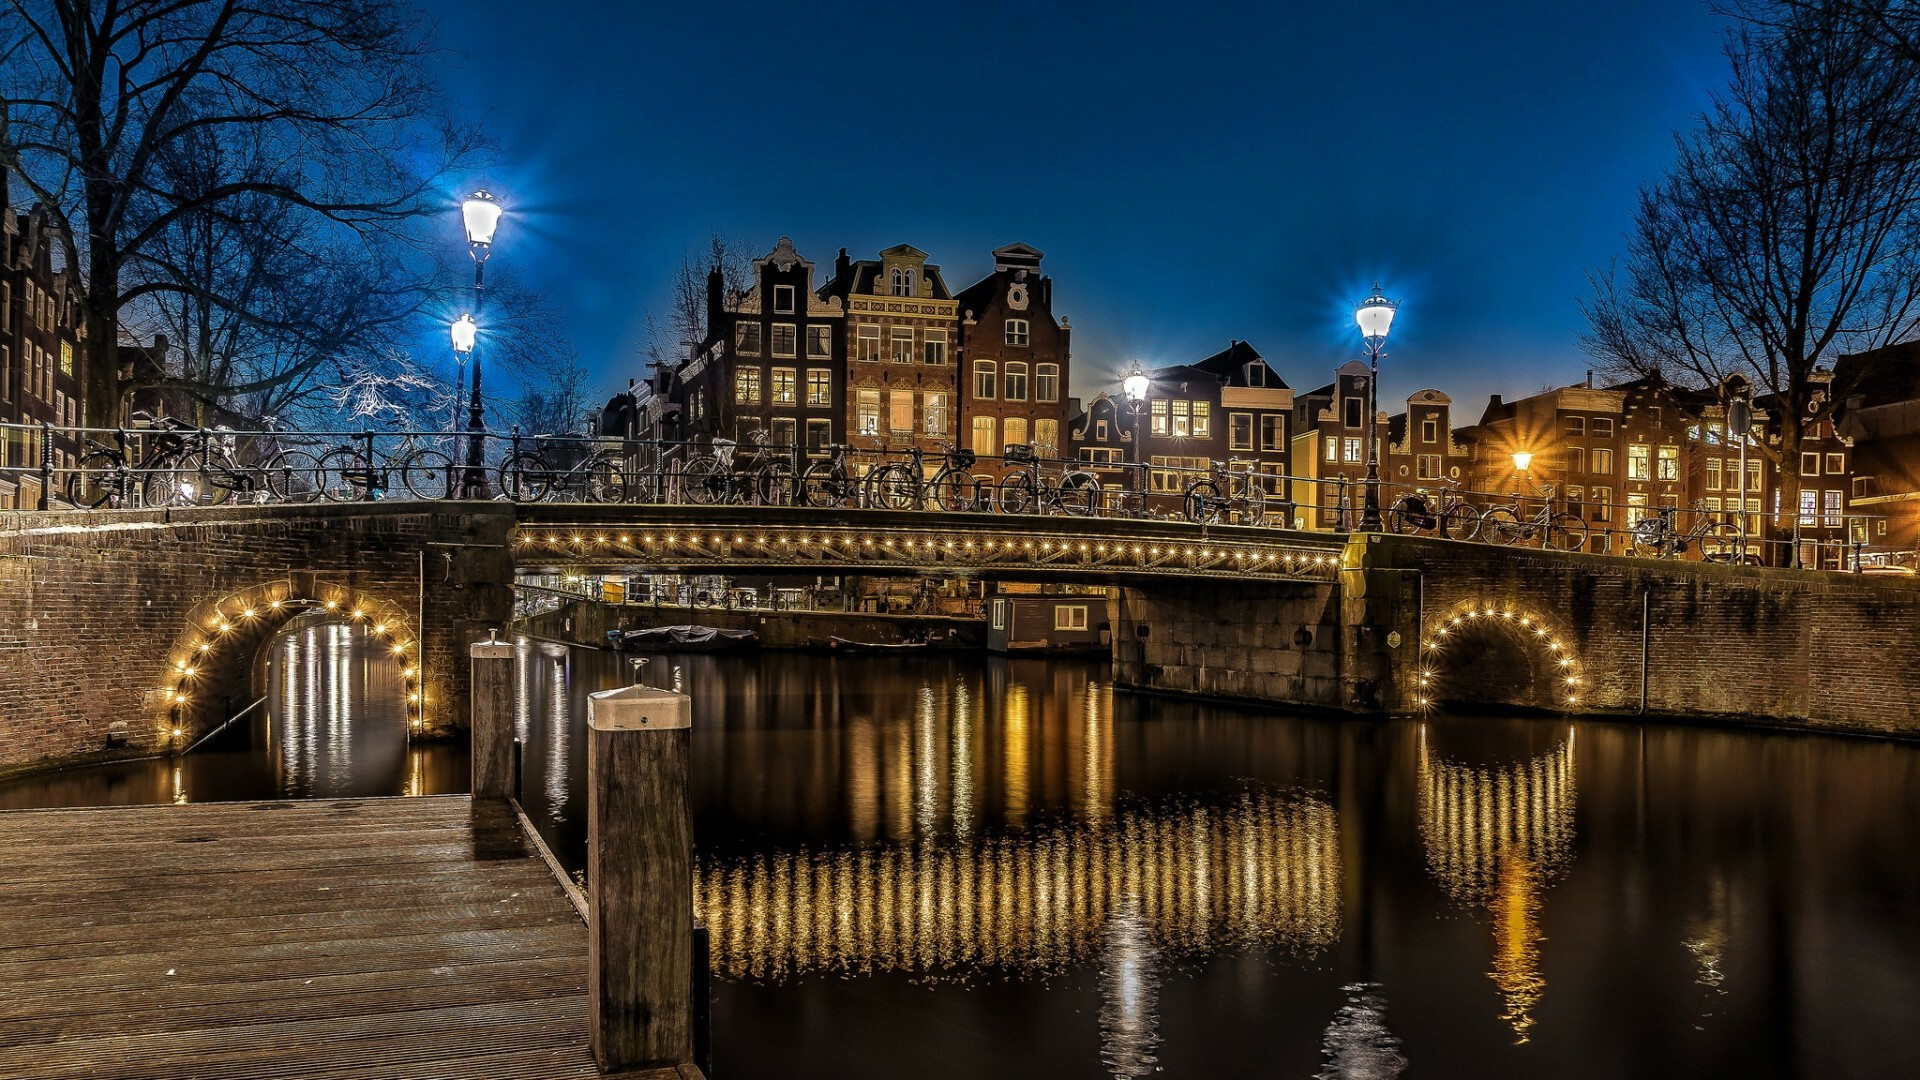 Netherlands: The Brouwersgracht, A canal in Amsterdam that connects the Singel with the Singelgracht. 1920x1080 Full HD Wallpaper.